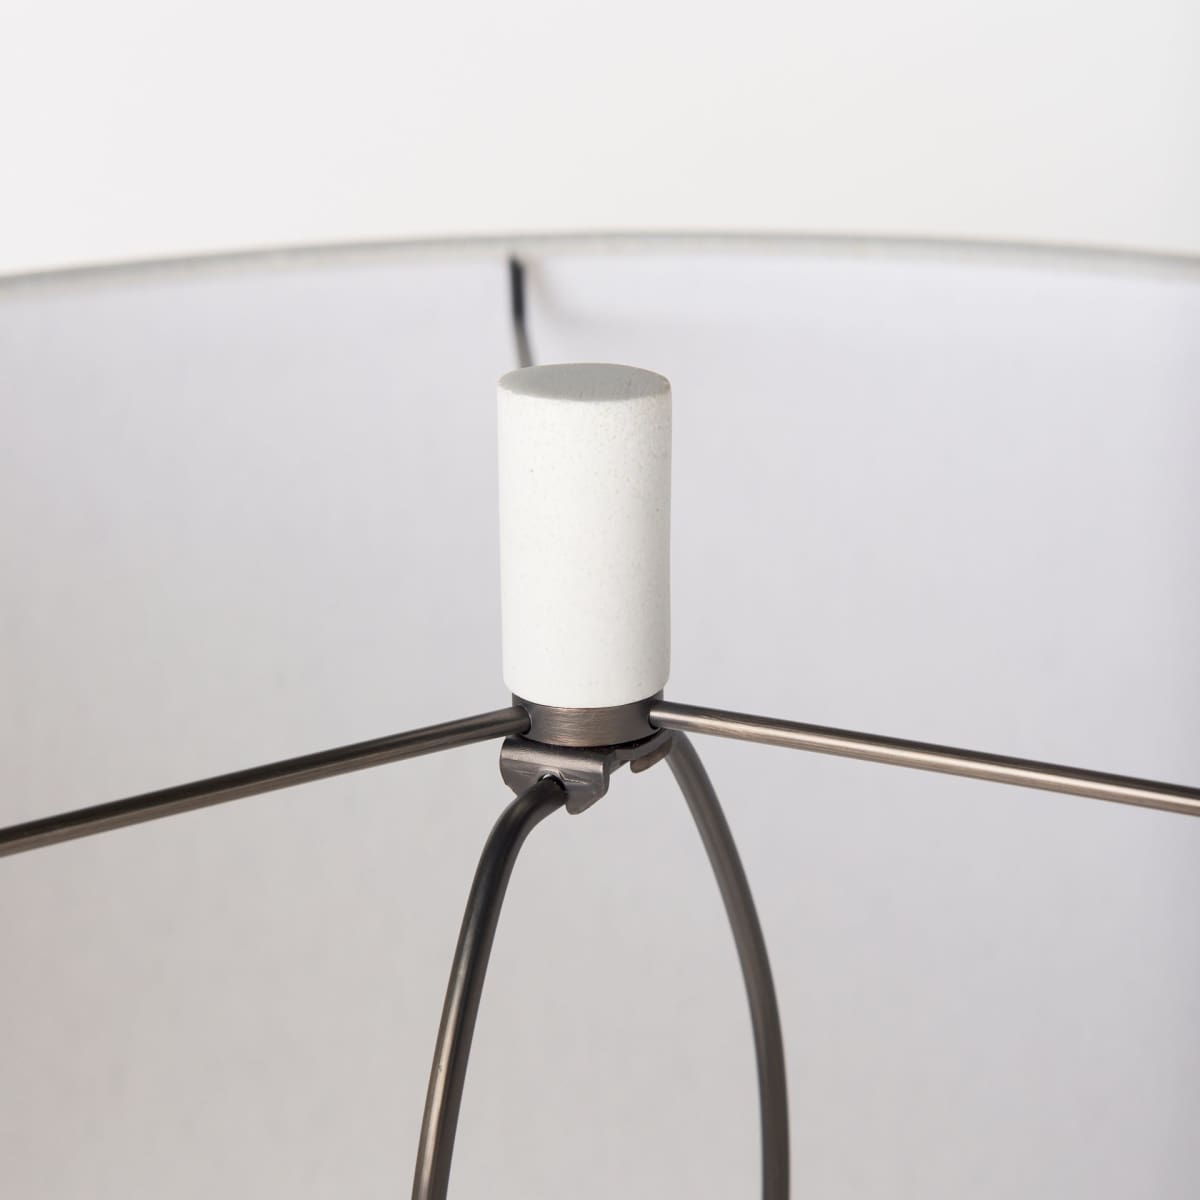 Tao Table Lamp White Base | Beige Shade - table-lamps